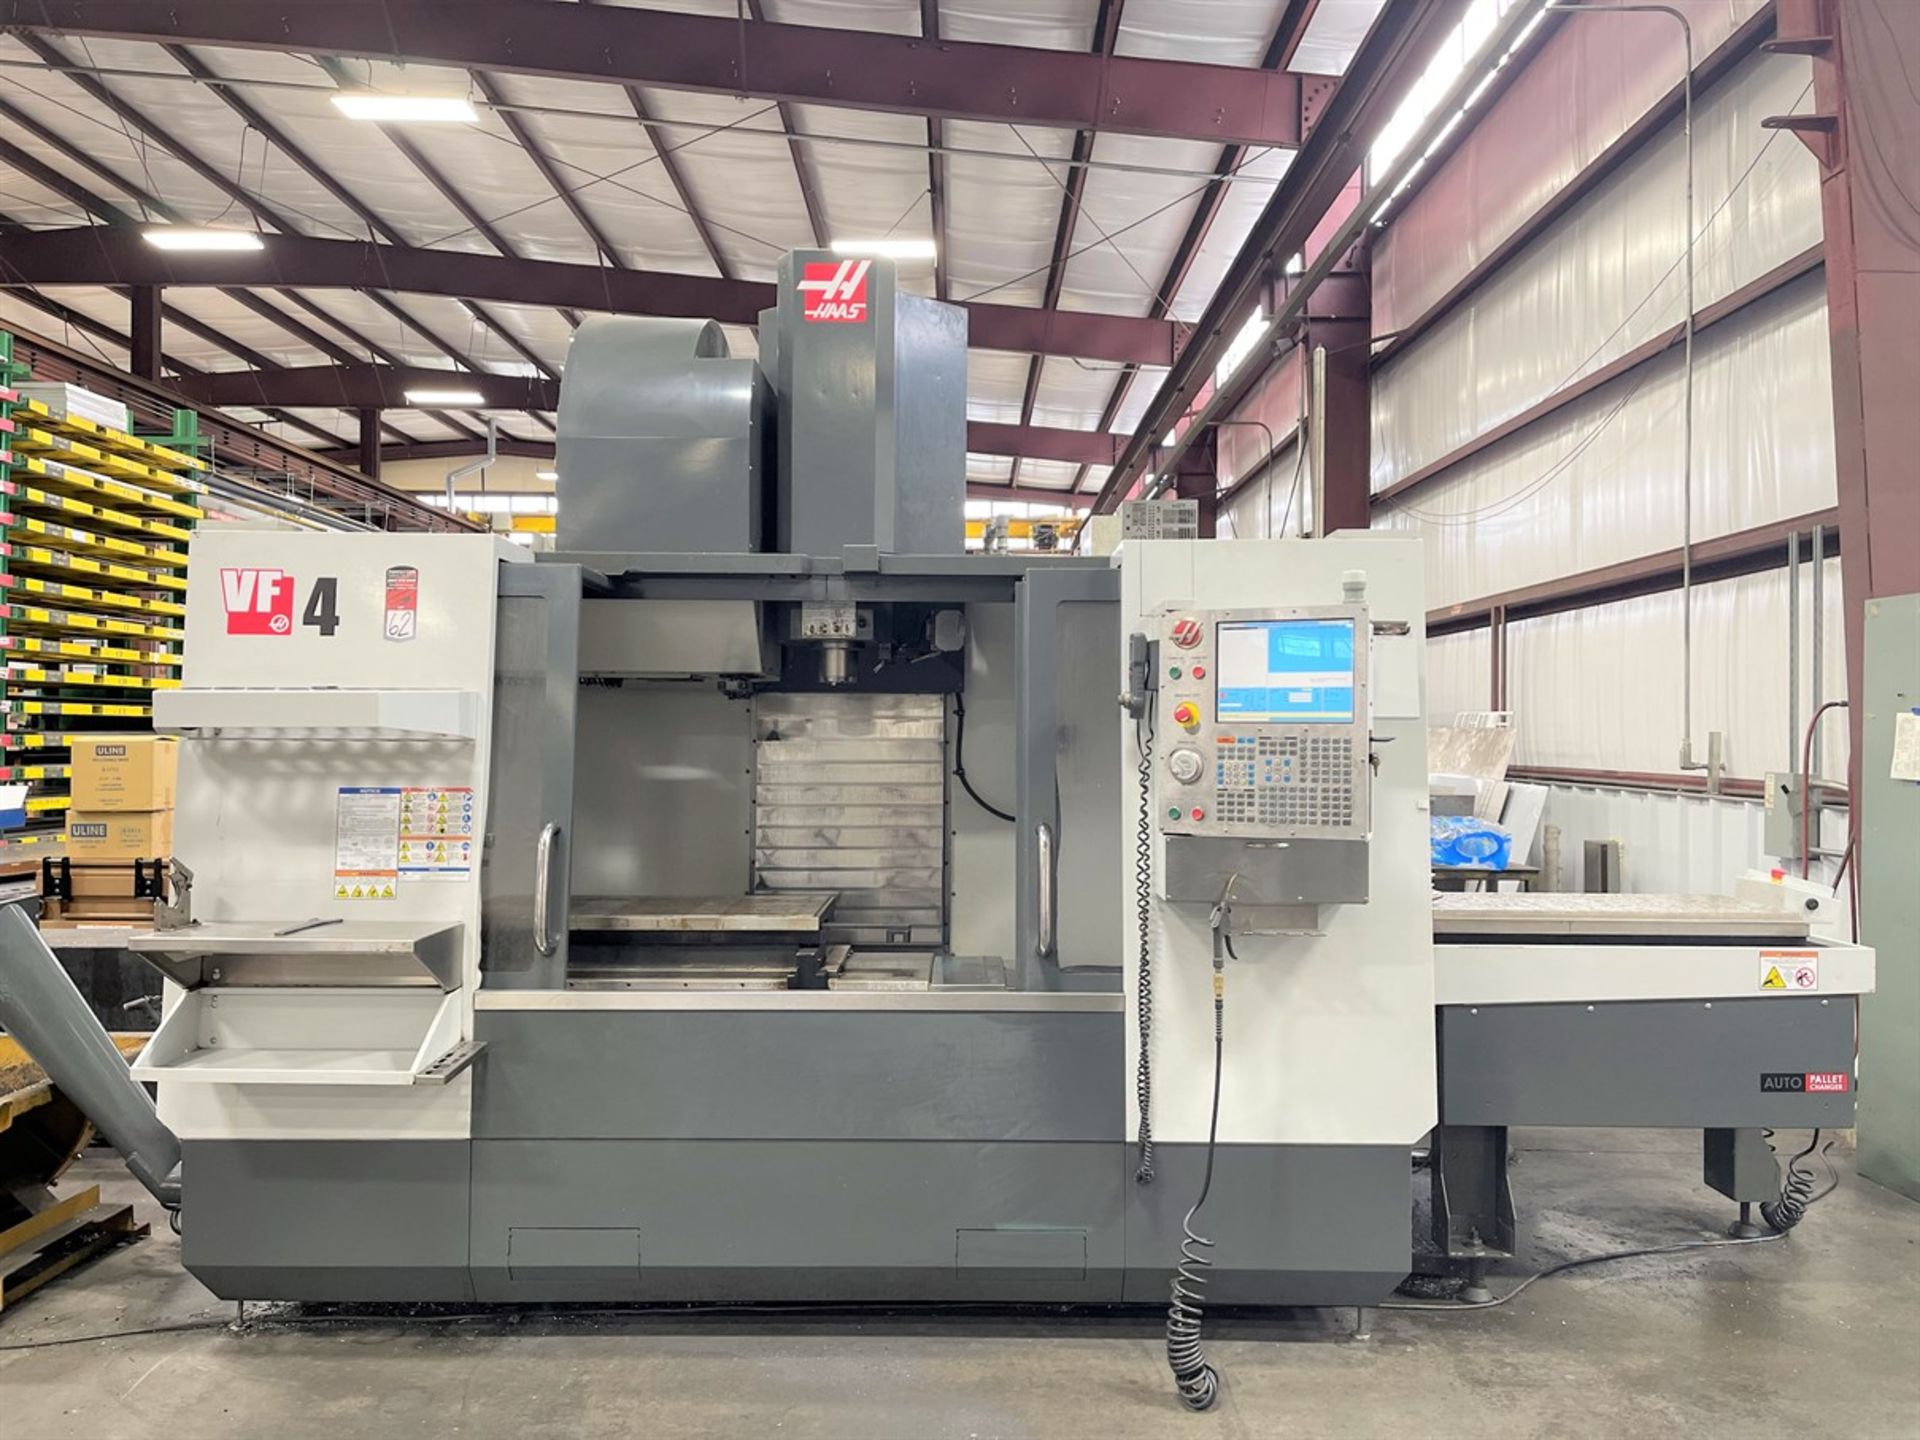 2010 HAAS VF-4APC 5 Axis Dual Pallet Vertical Machining Center, s/n 1080486, w/ HAAS Control, - Image 2 of 10